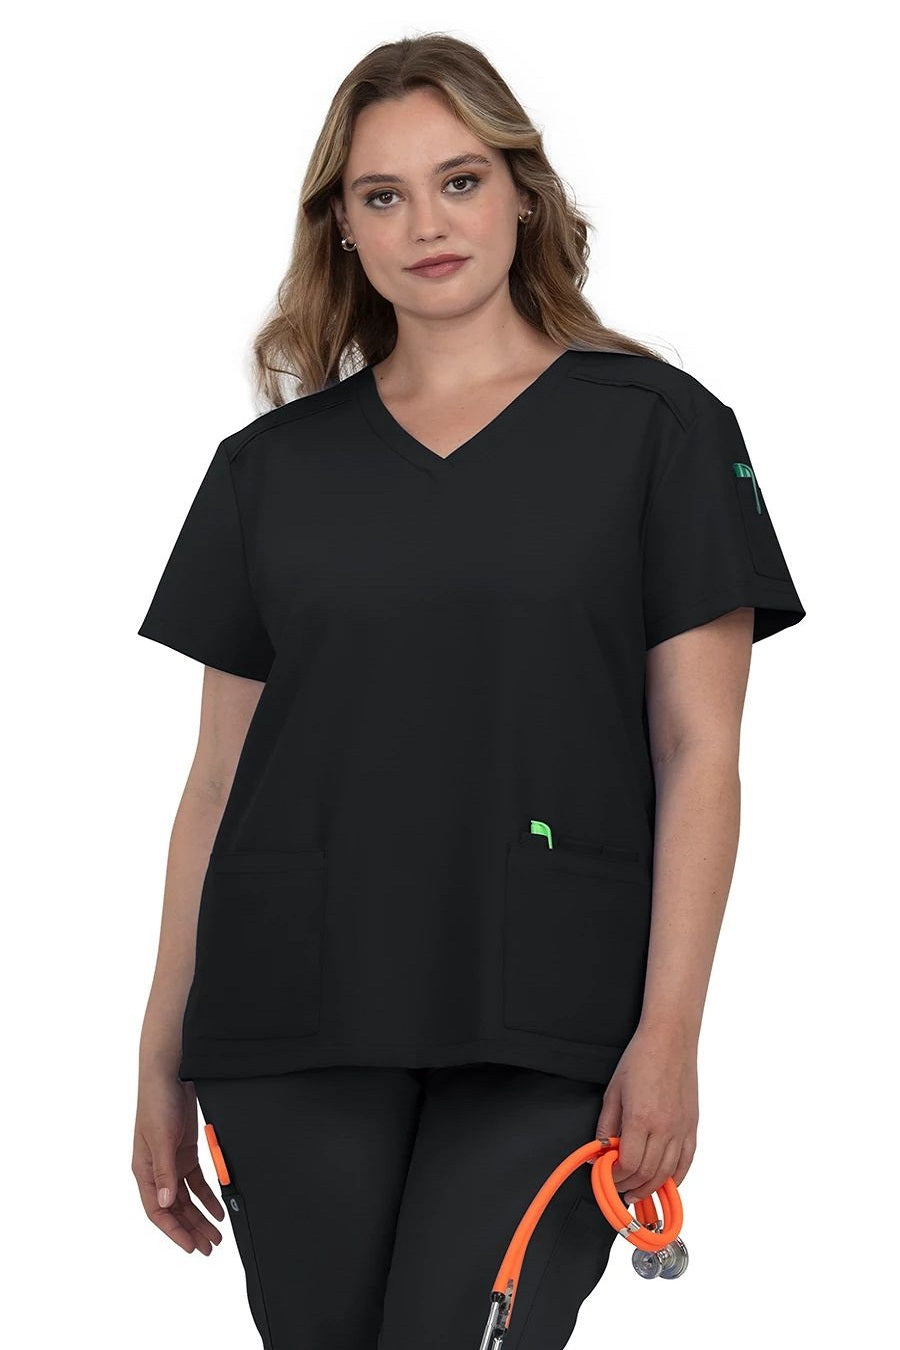 koi Scrub Top Cureology Cardi in Black at Parker's Clothing and Shoes.